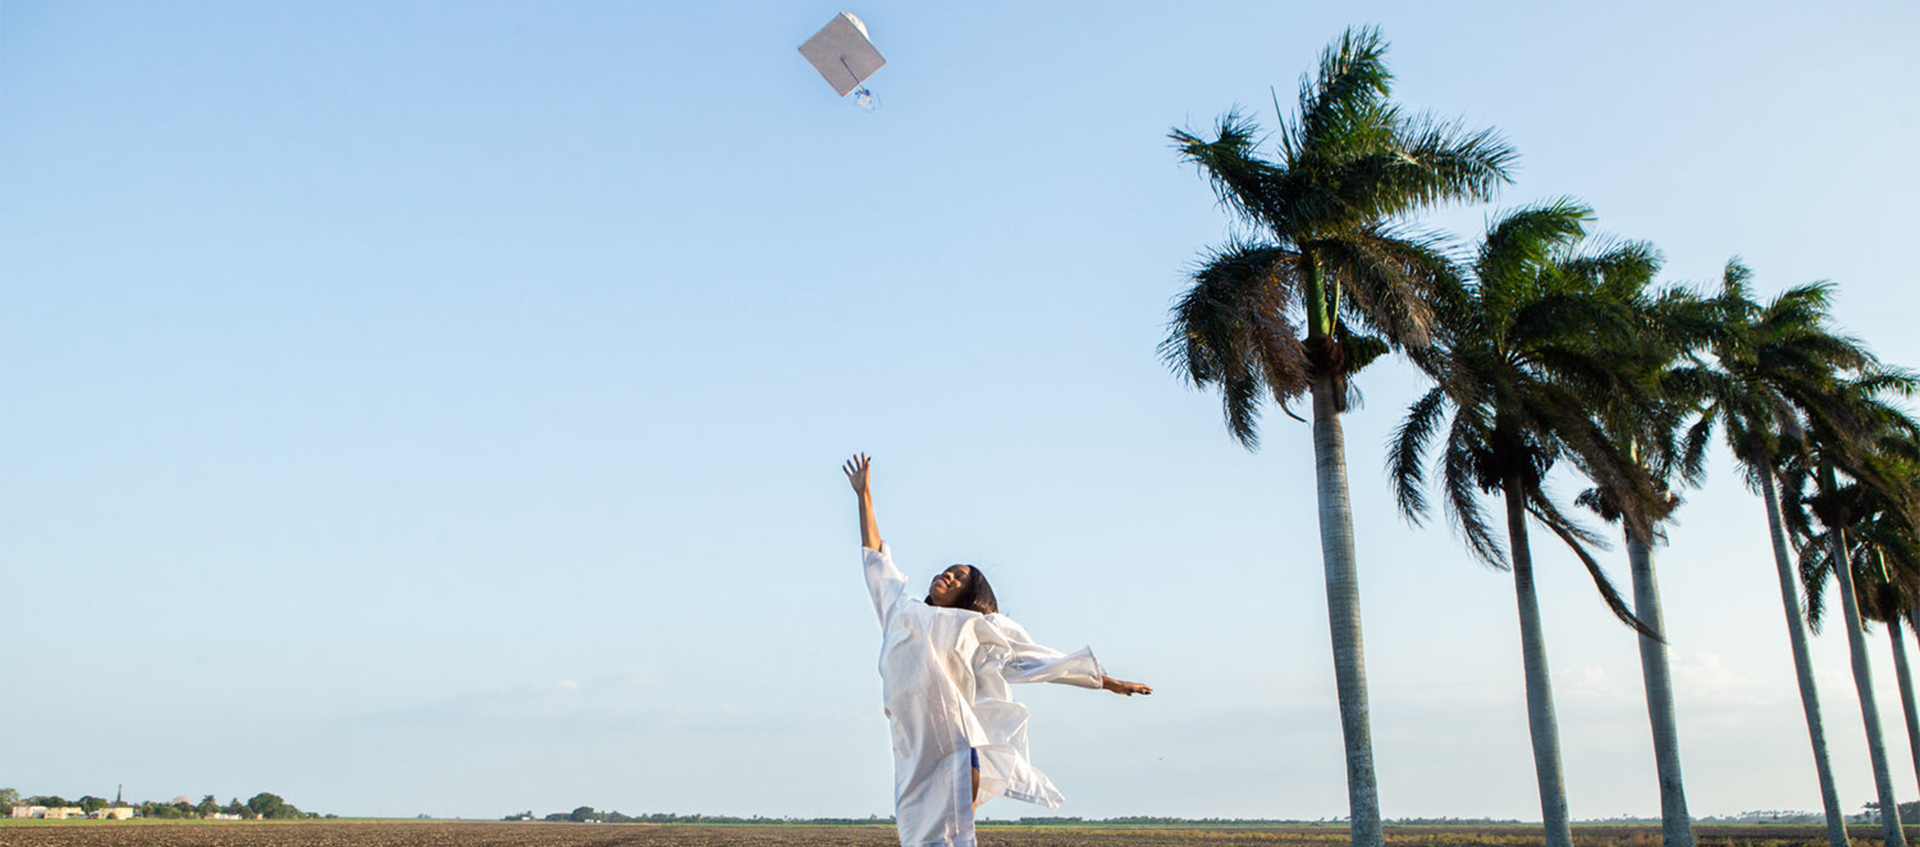 A young woman in a graduation gown throws her cap into the air on a palm tree-lined street in a scene from the documentary Pahokee